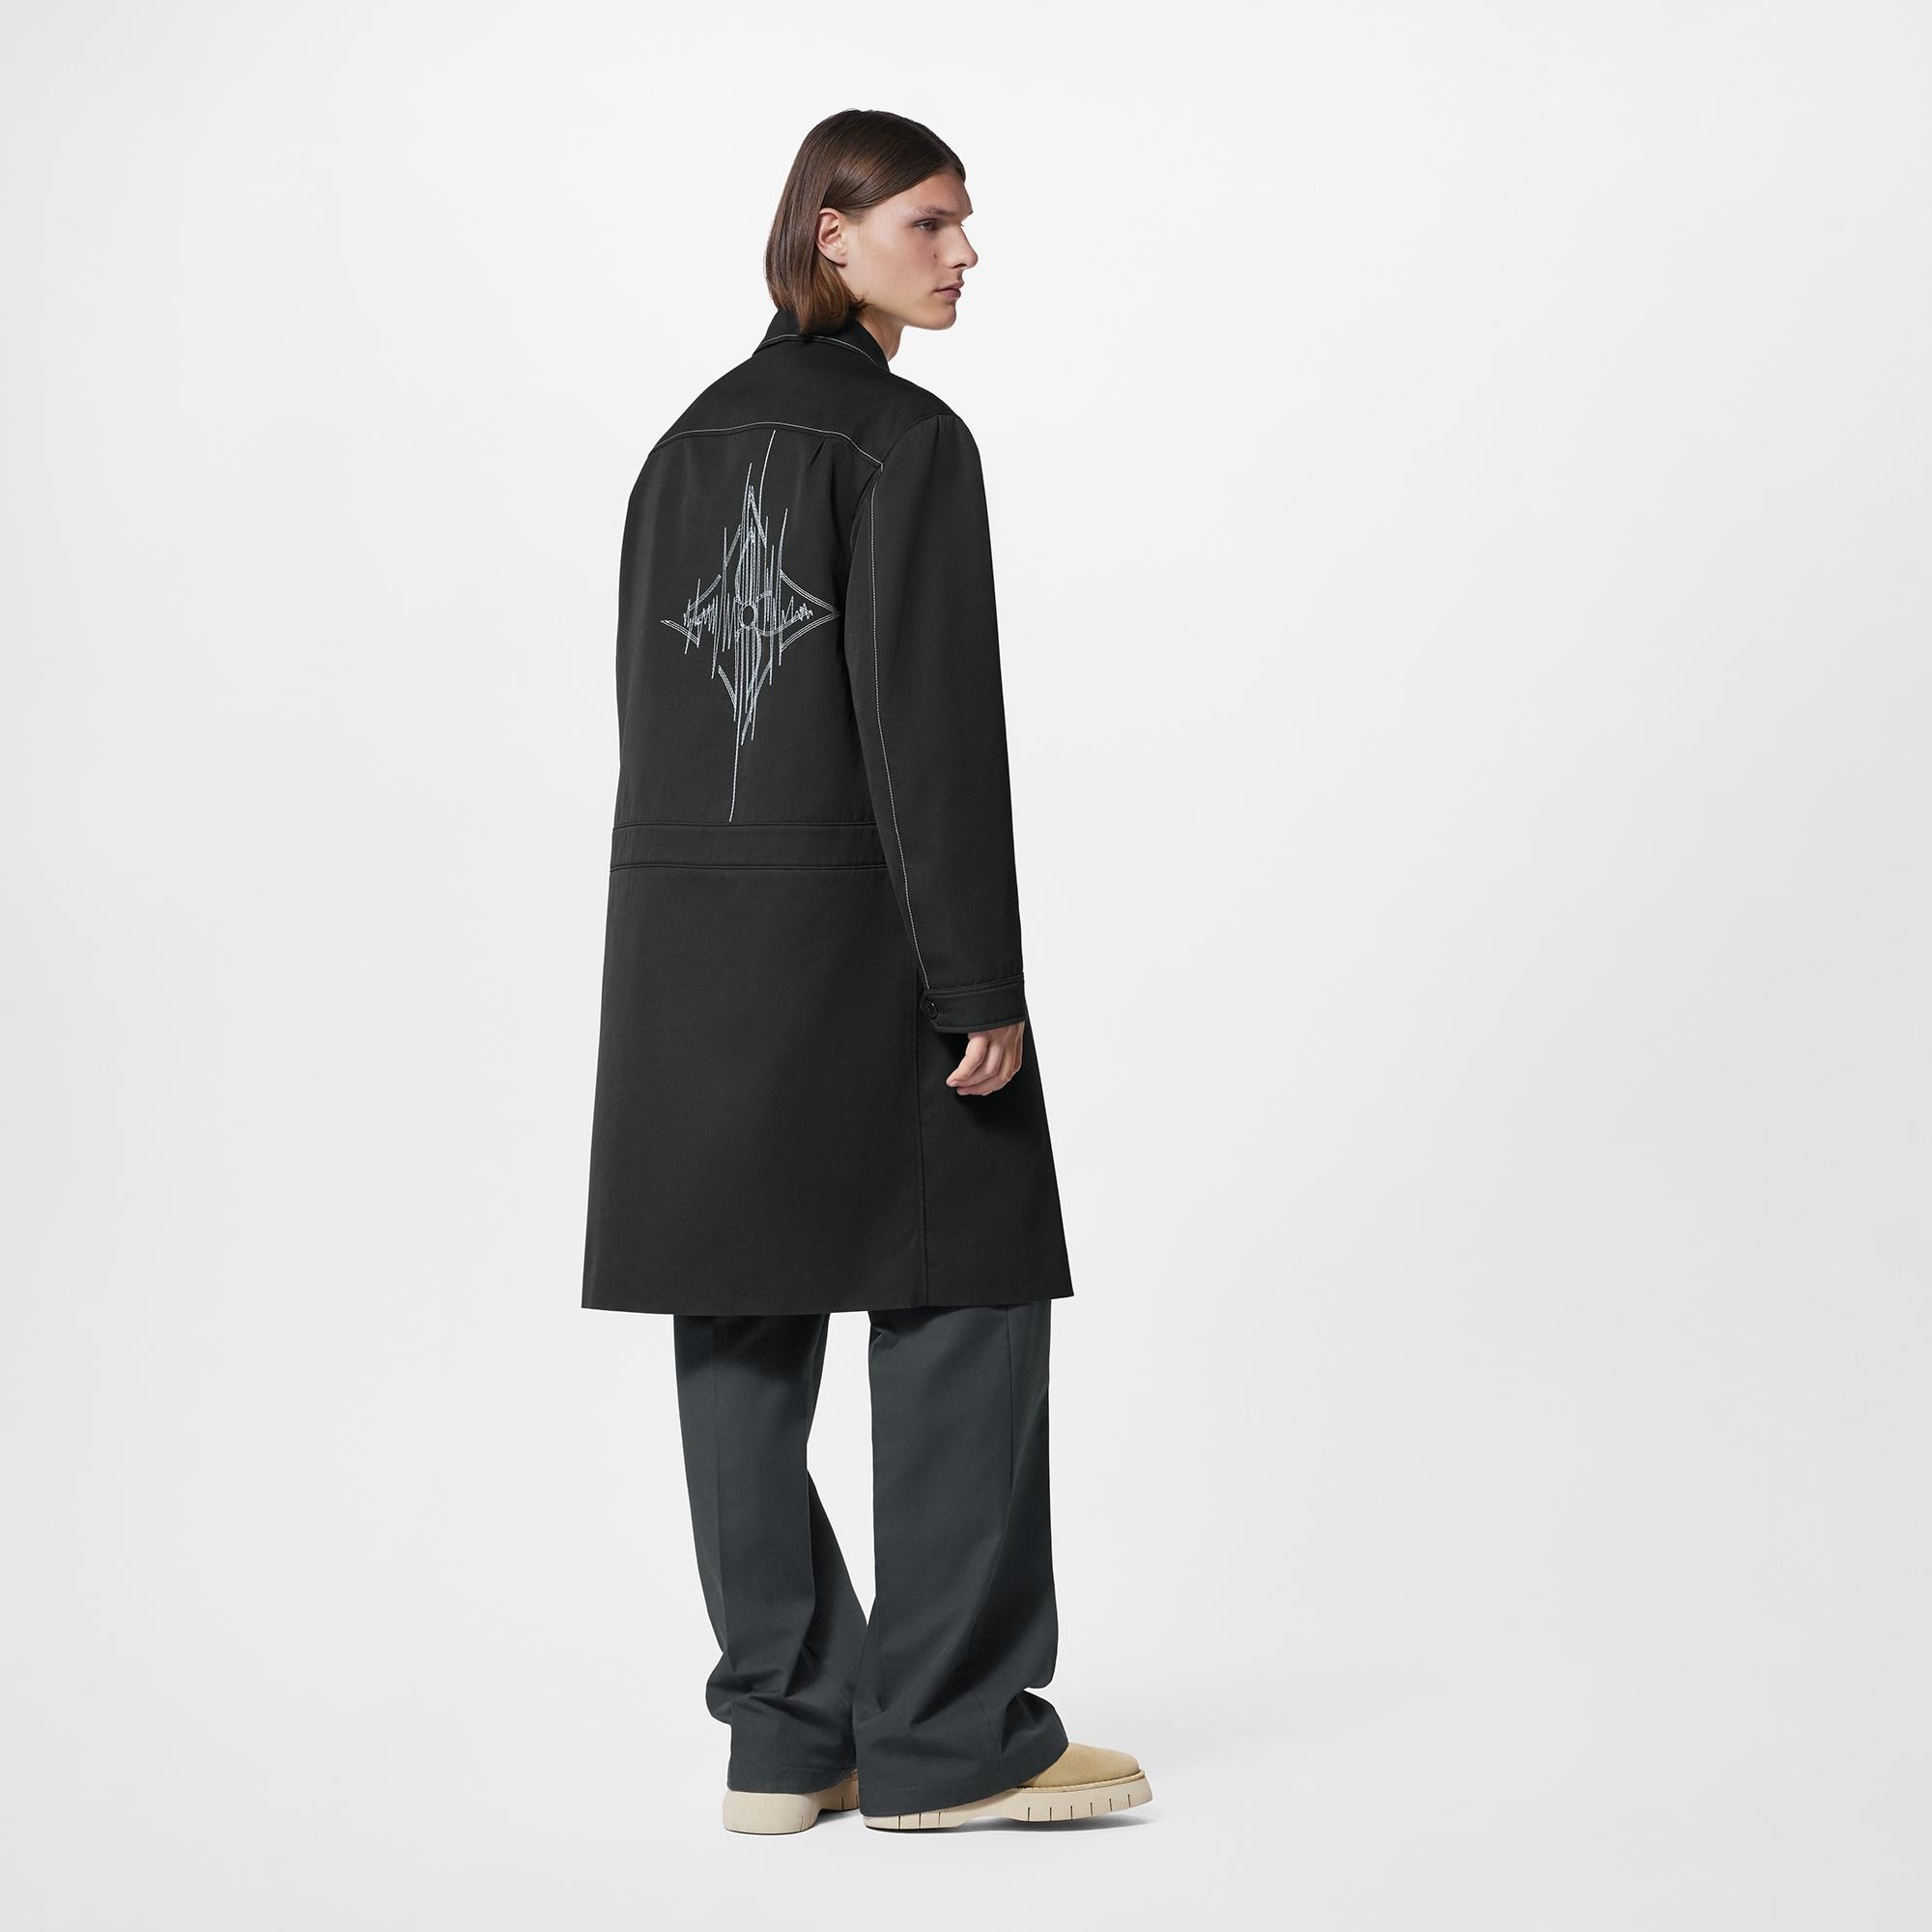 LV Frequency Raincoat - 3